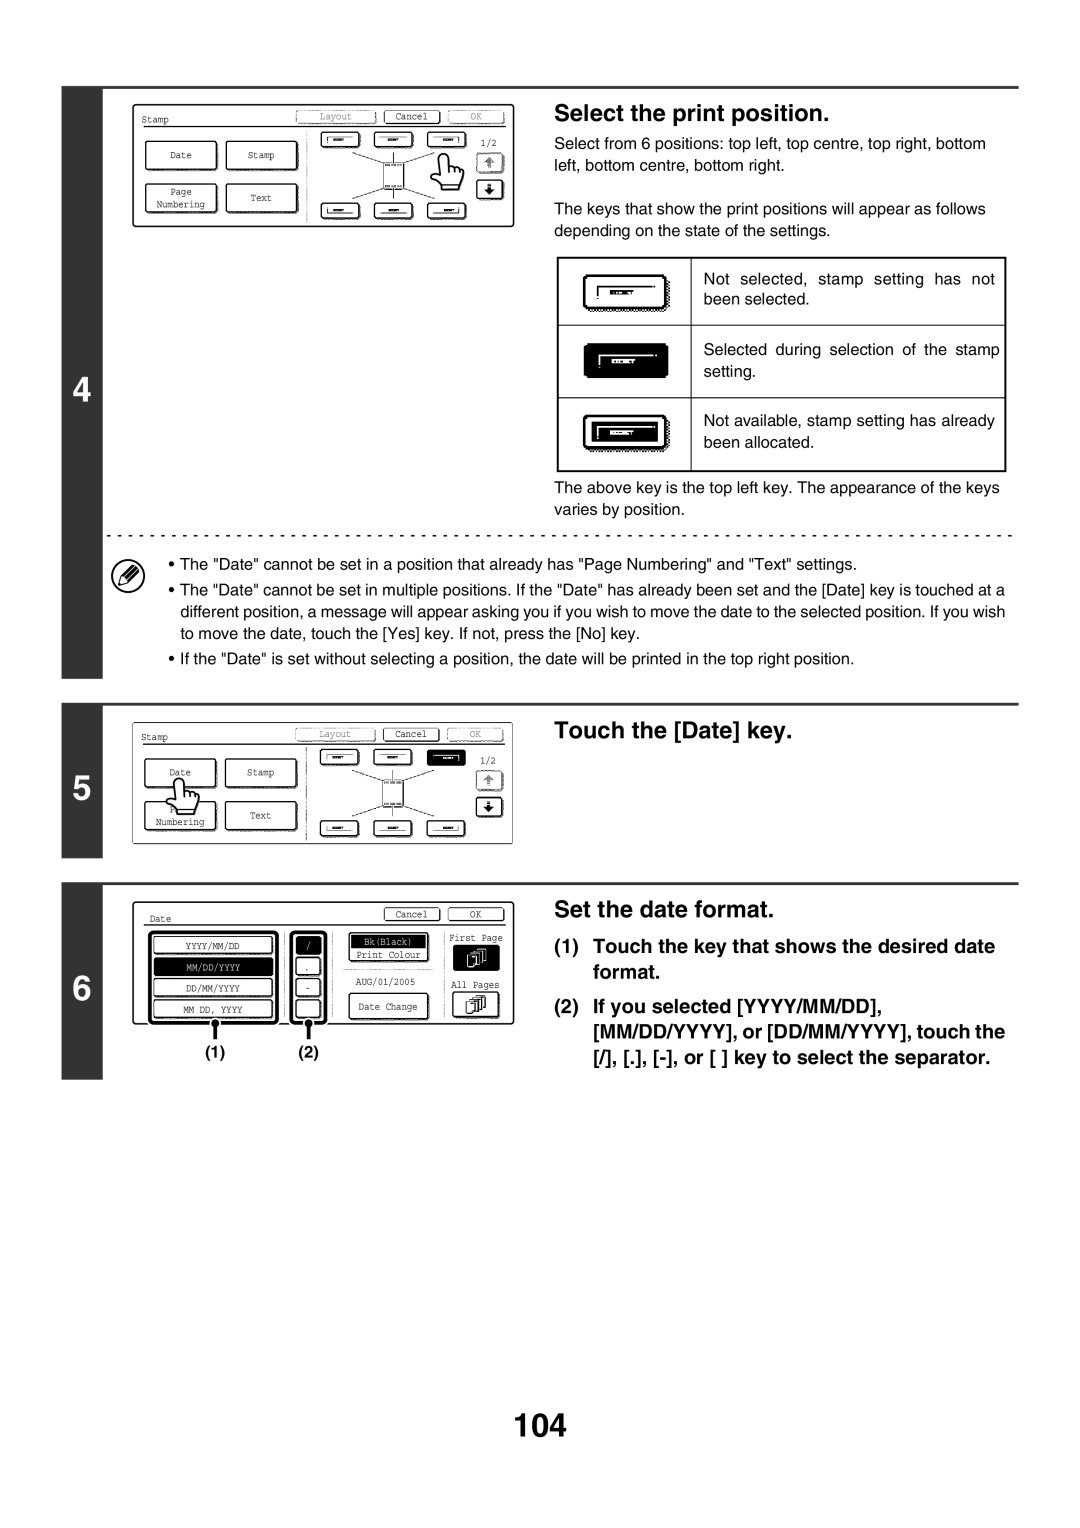 Sharp MX-2700N, MX-4501N, MX-2300G, MX-3501N, MX-2300N Select the print position, Touch the Date key, Set the date format 